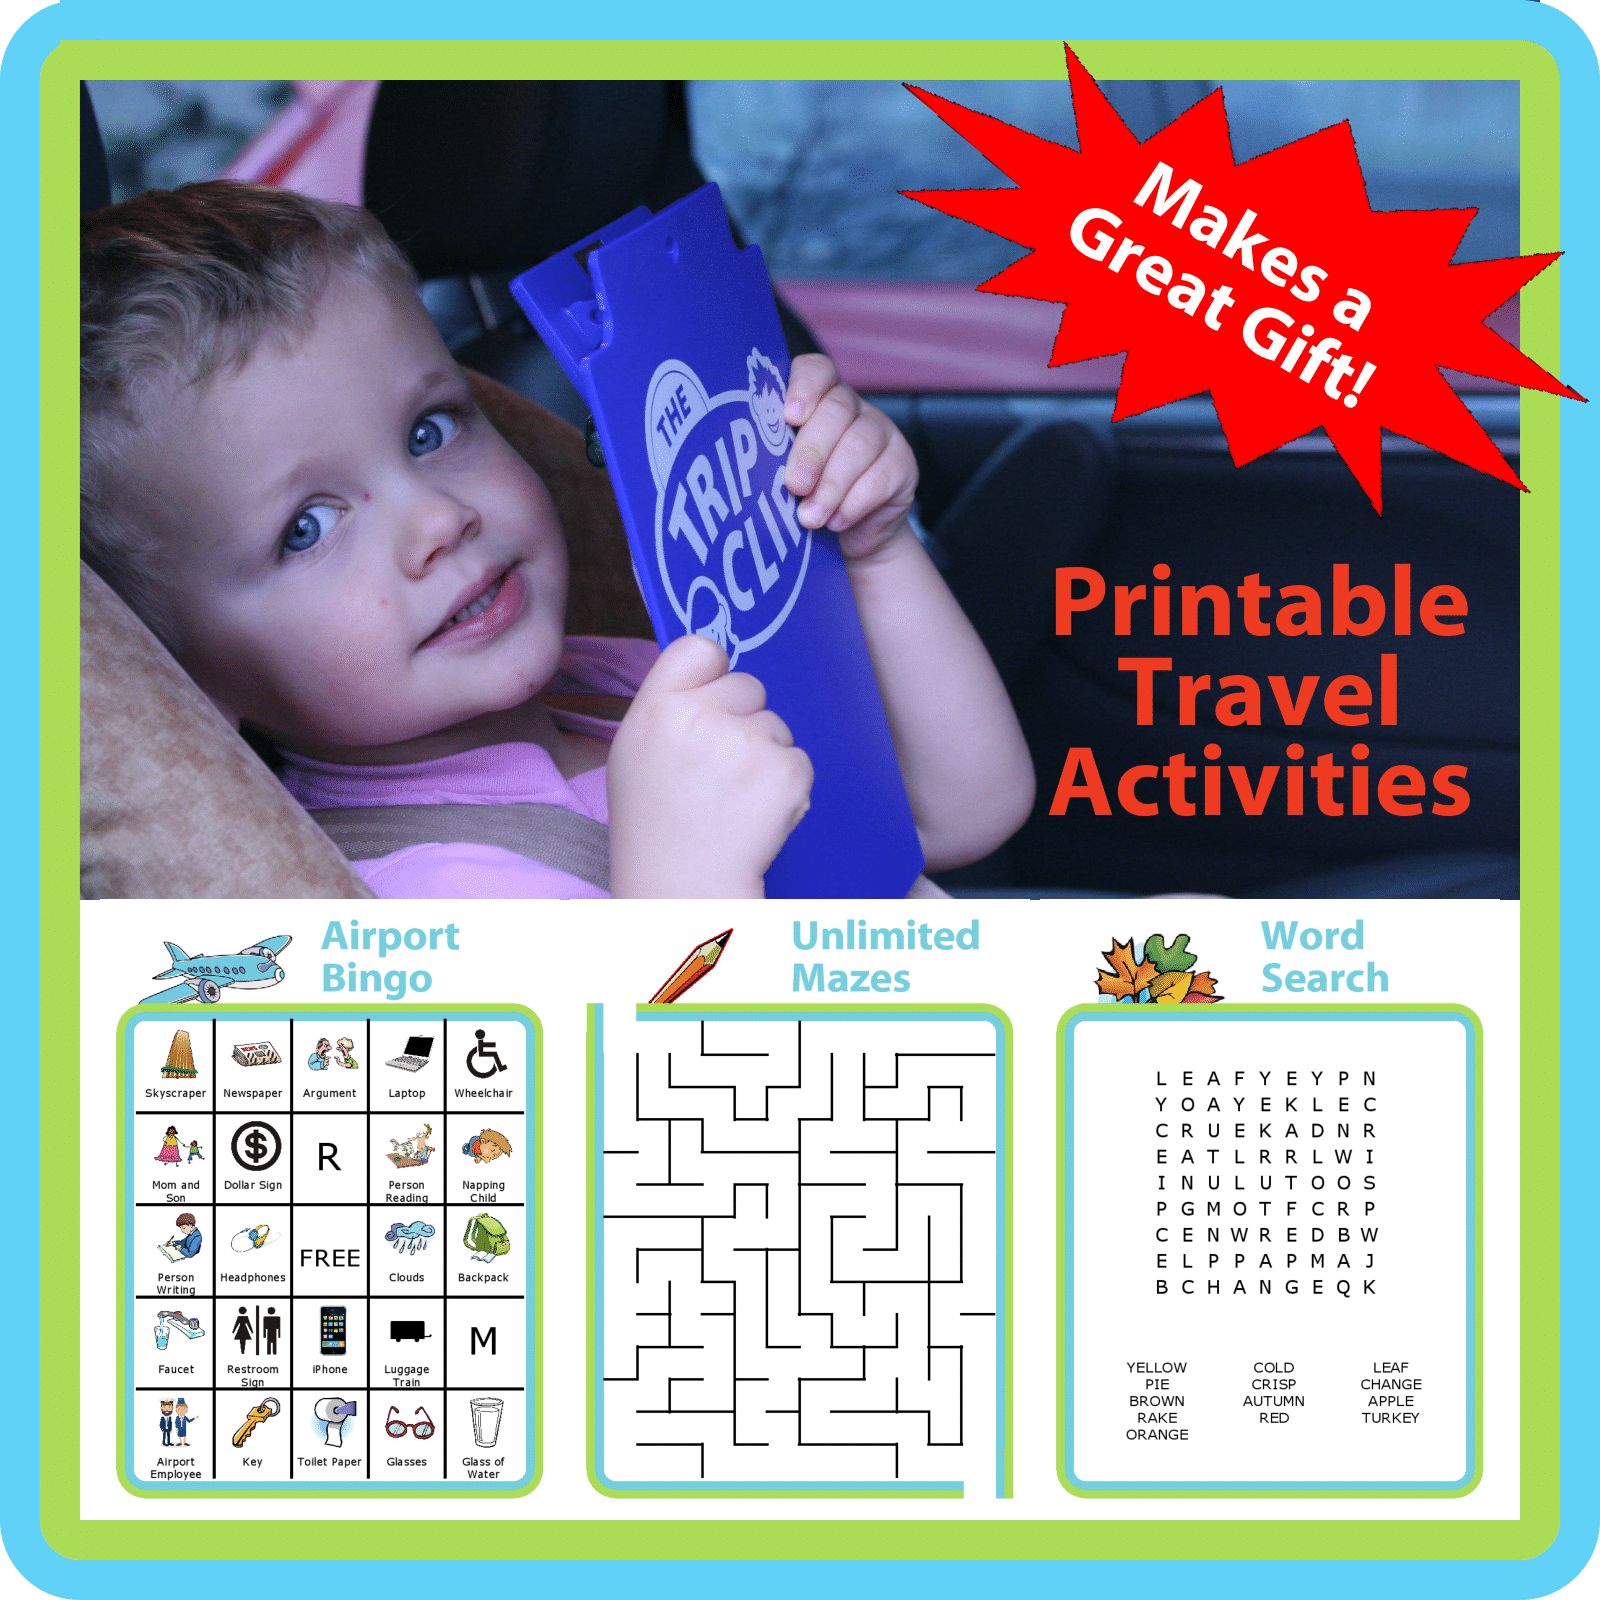 A kid-sized clipboard, attached pen, and unlimited printable travel activities make this a great gift idea for the holidays!